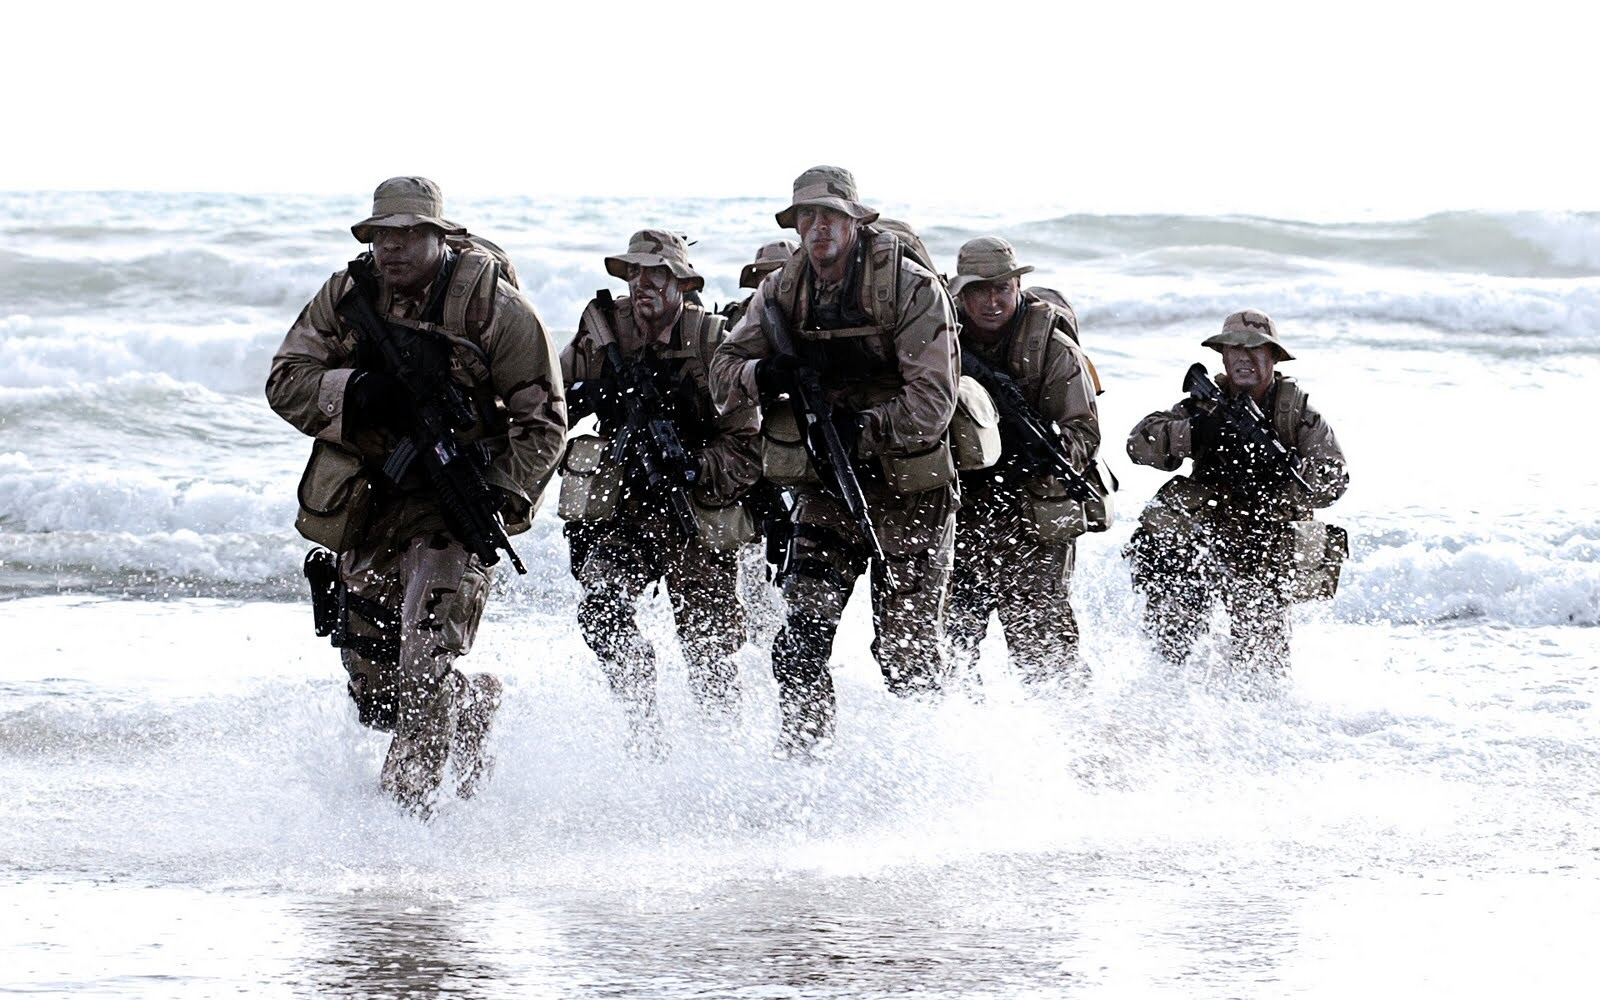 Navy seals through any terrain photo credit navy seal swcc by